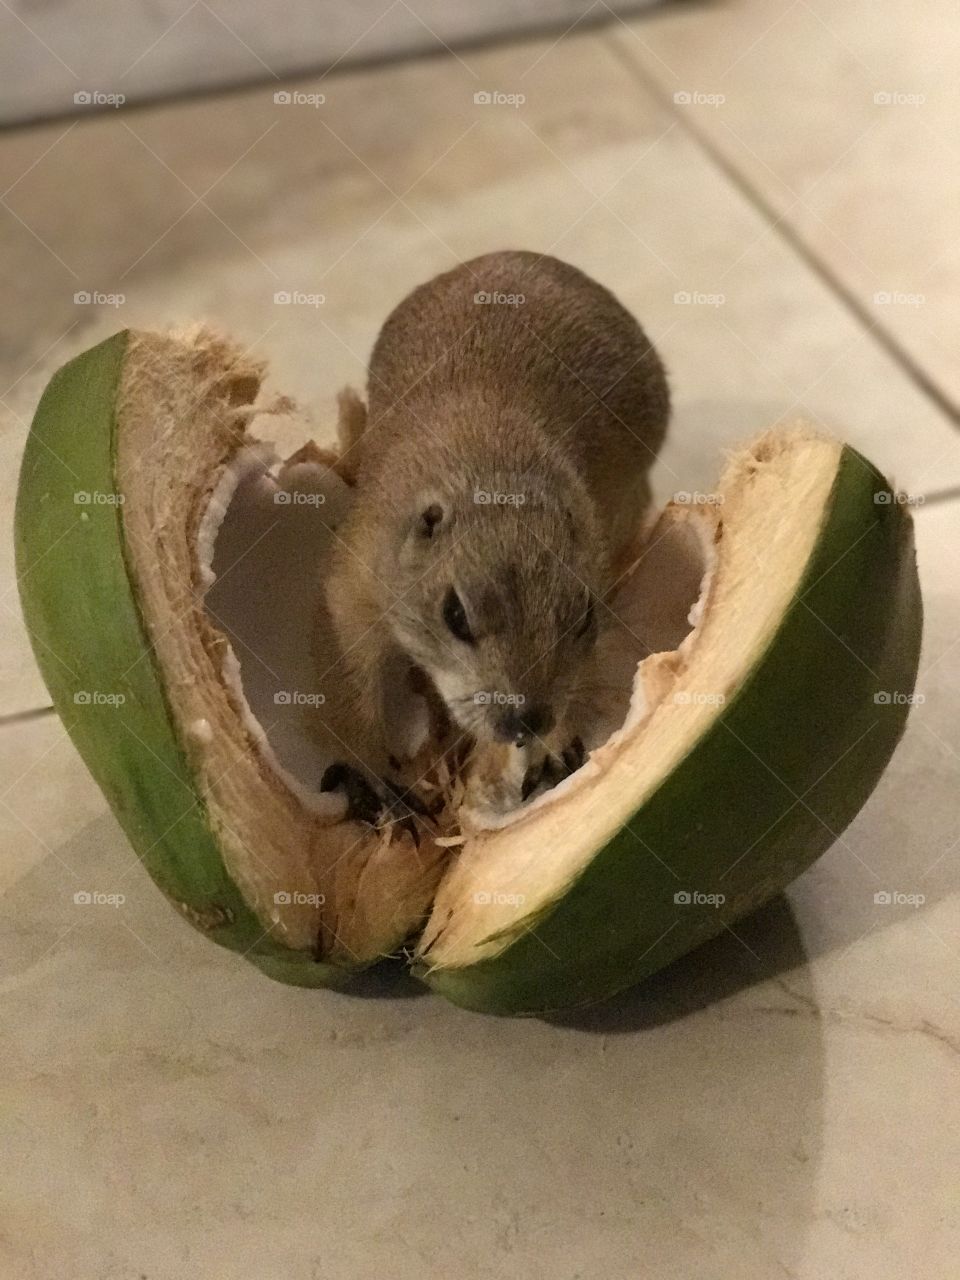 Our prairie dog Bob eating coconut when he was younger. 